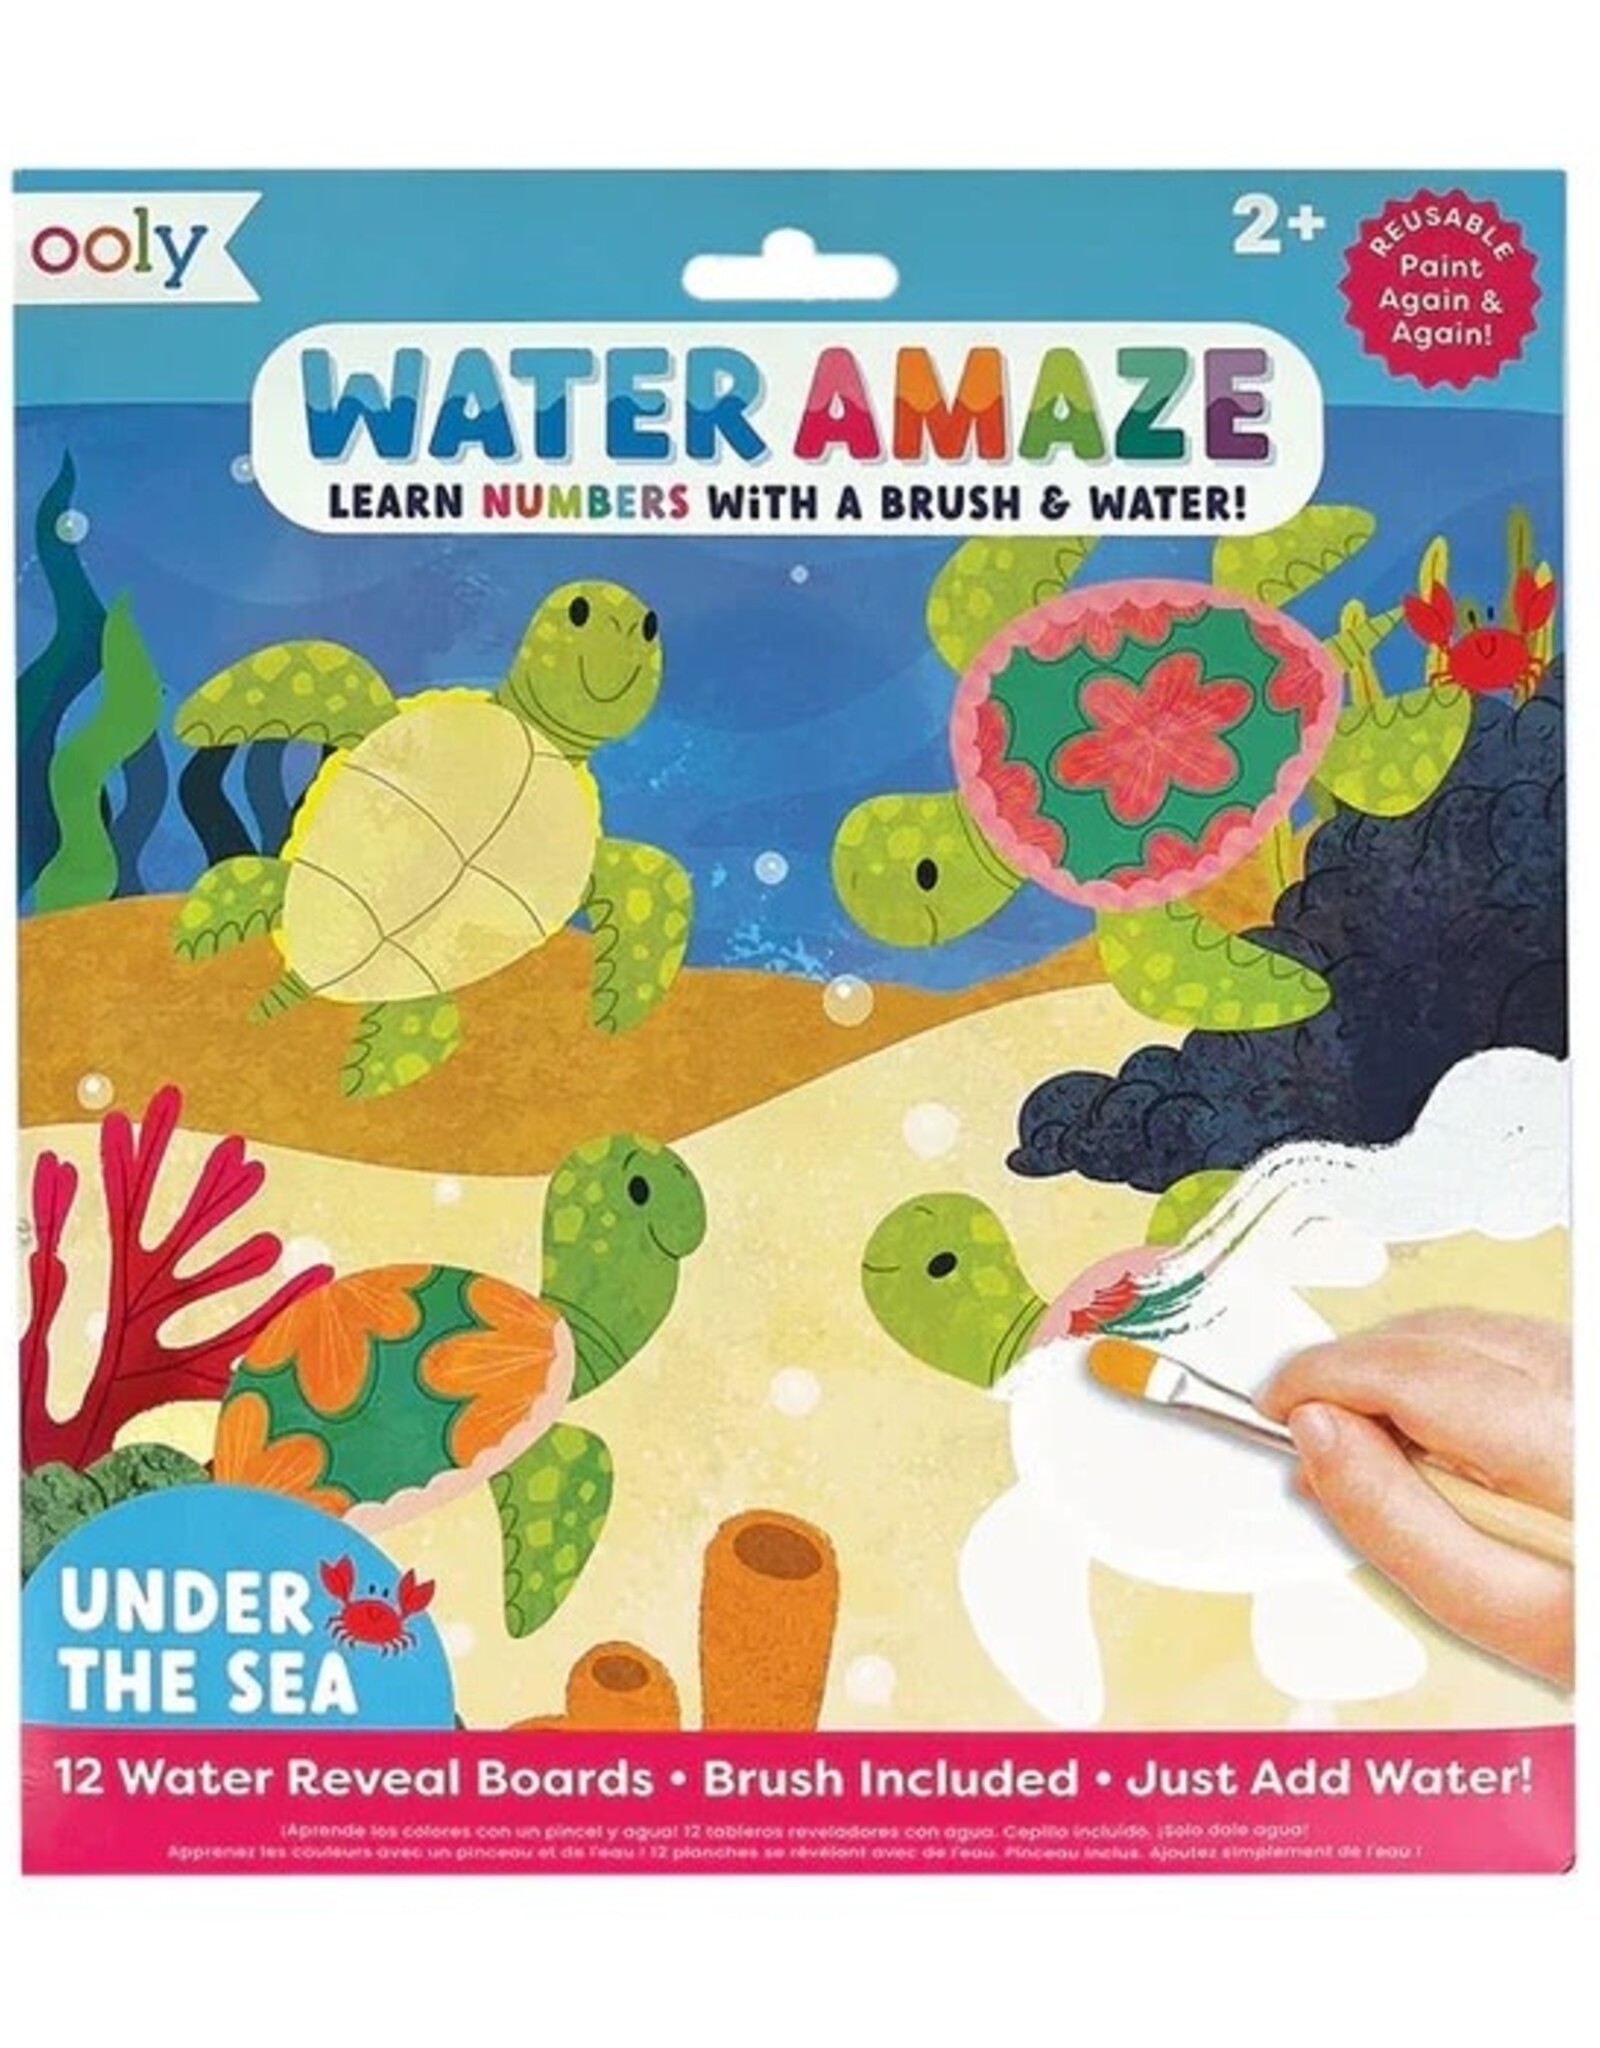 OOLY WATER AMAZE WATER REVEAL BOARDS - UNDER THE SEA